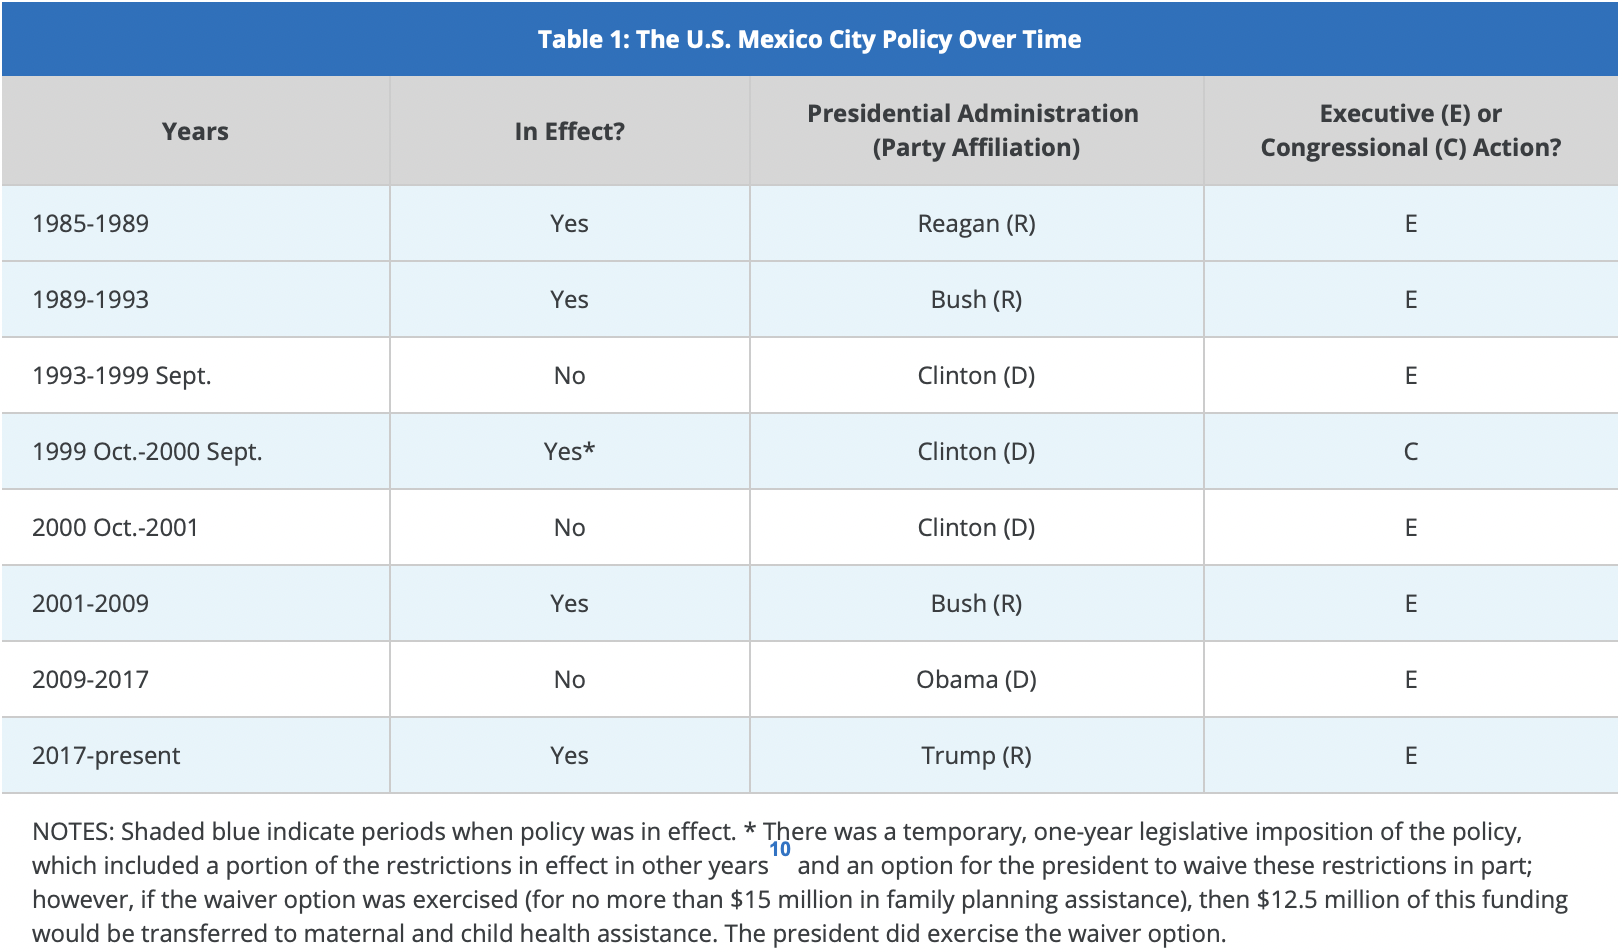 The U.S. Mexico City Policy Over Time